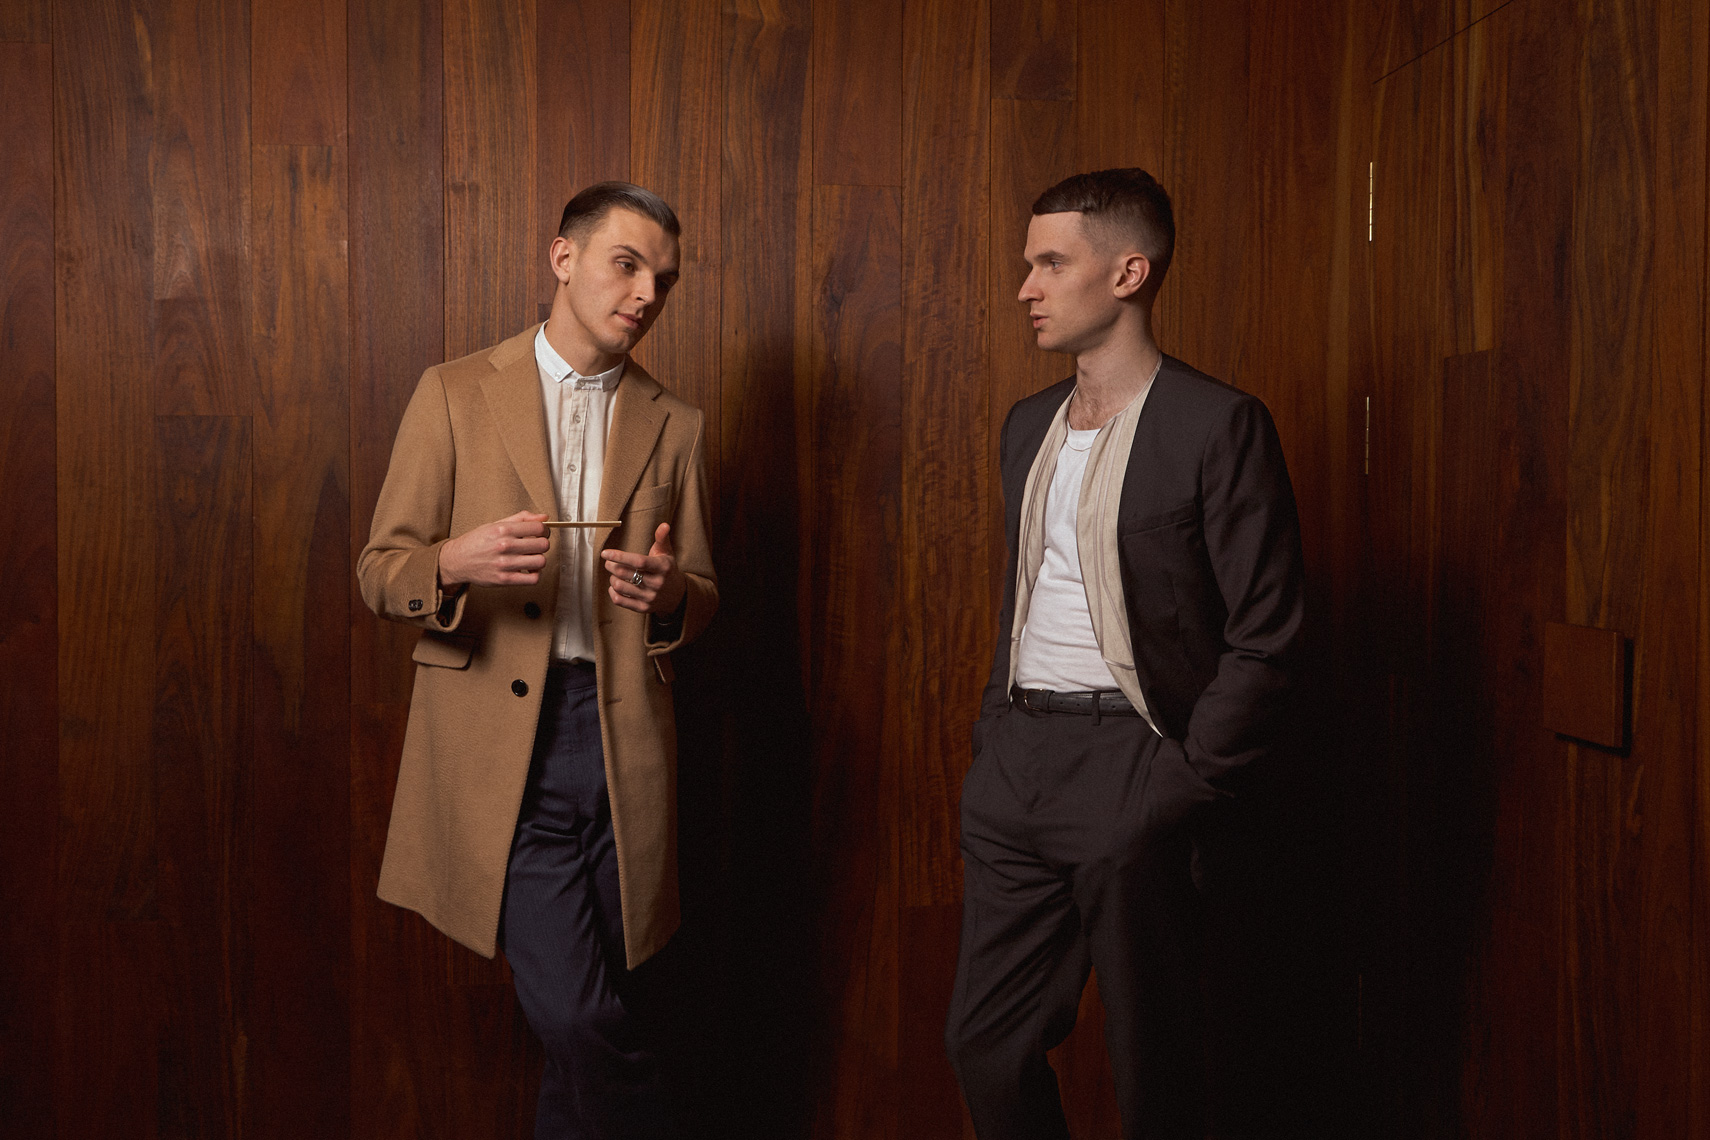 Hurts photographed by Tom Oxley